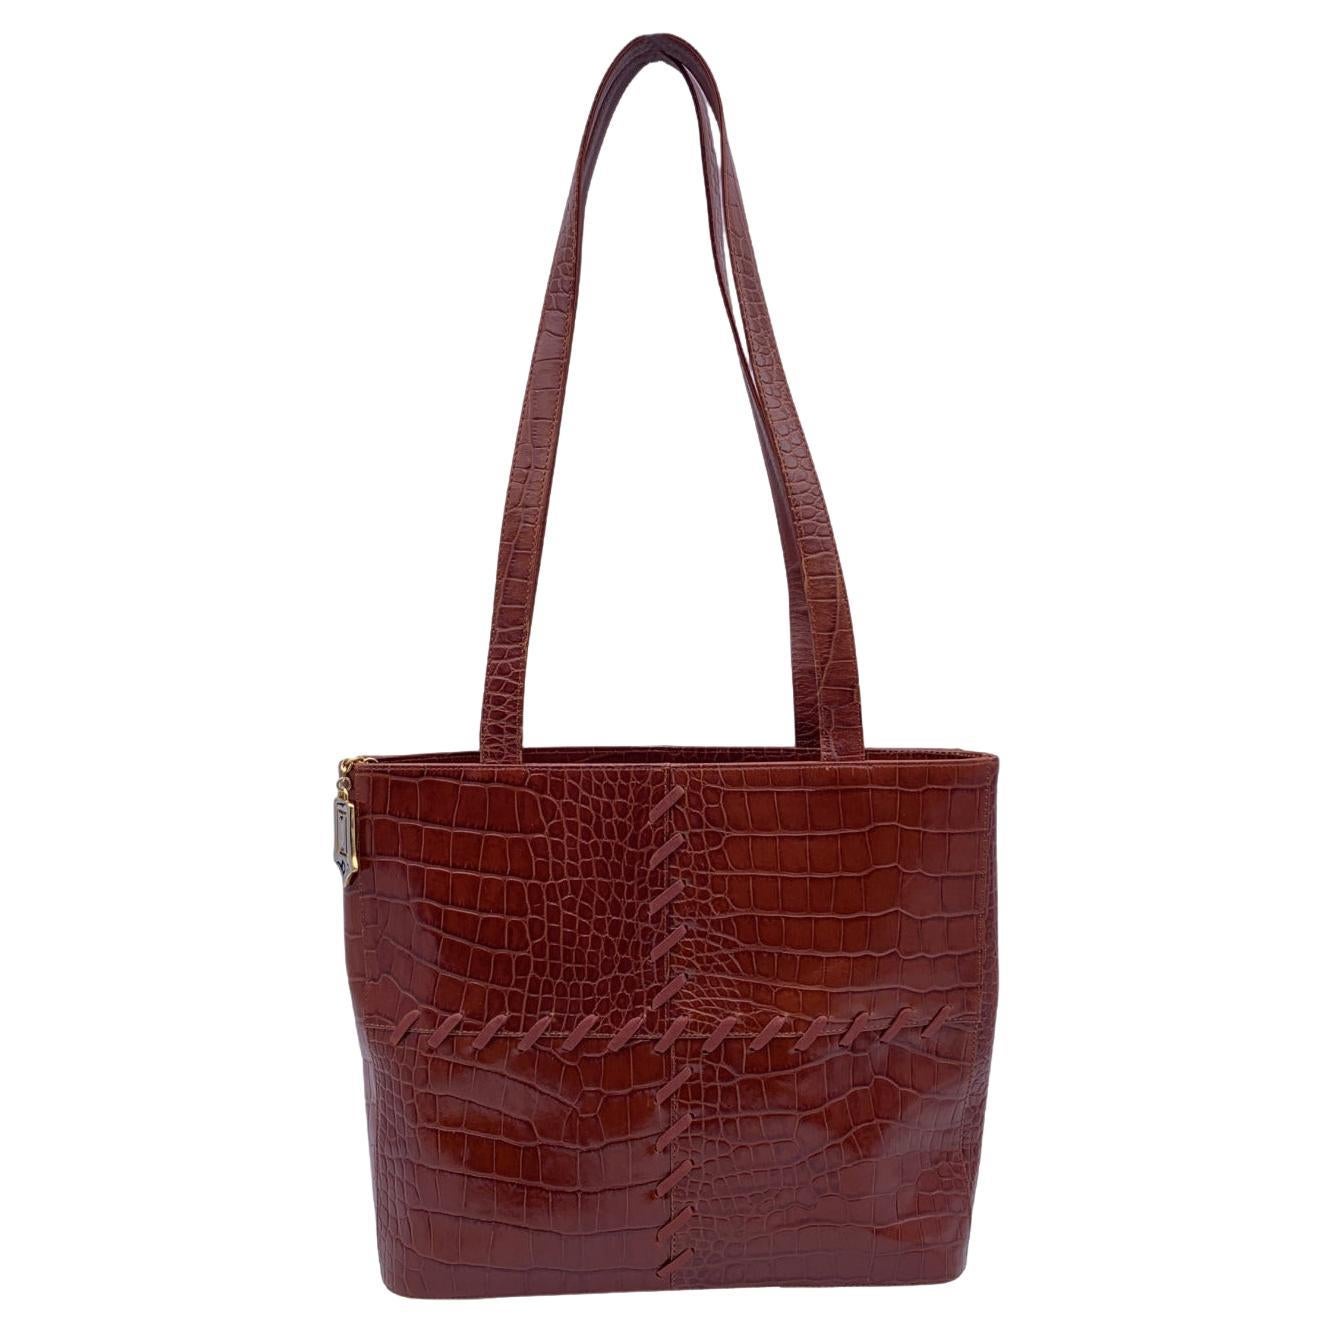 Yves Saint Laurent Vintage Brown Embossed Leather Stitch Tote Bag For Sale